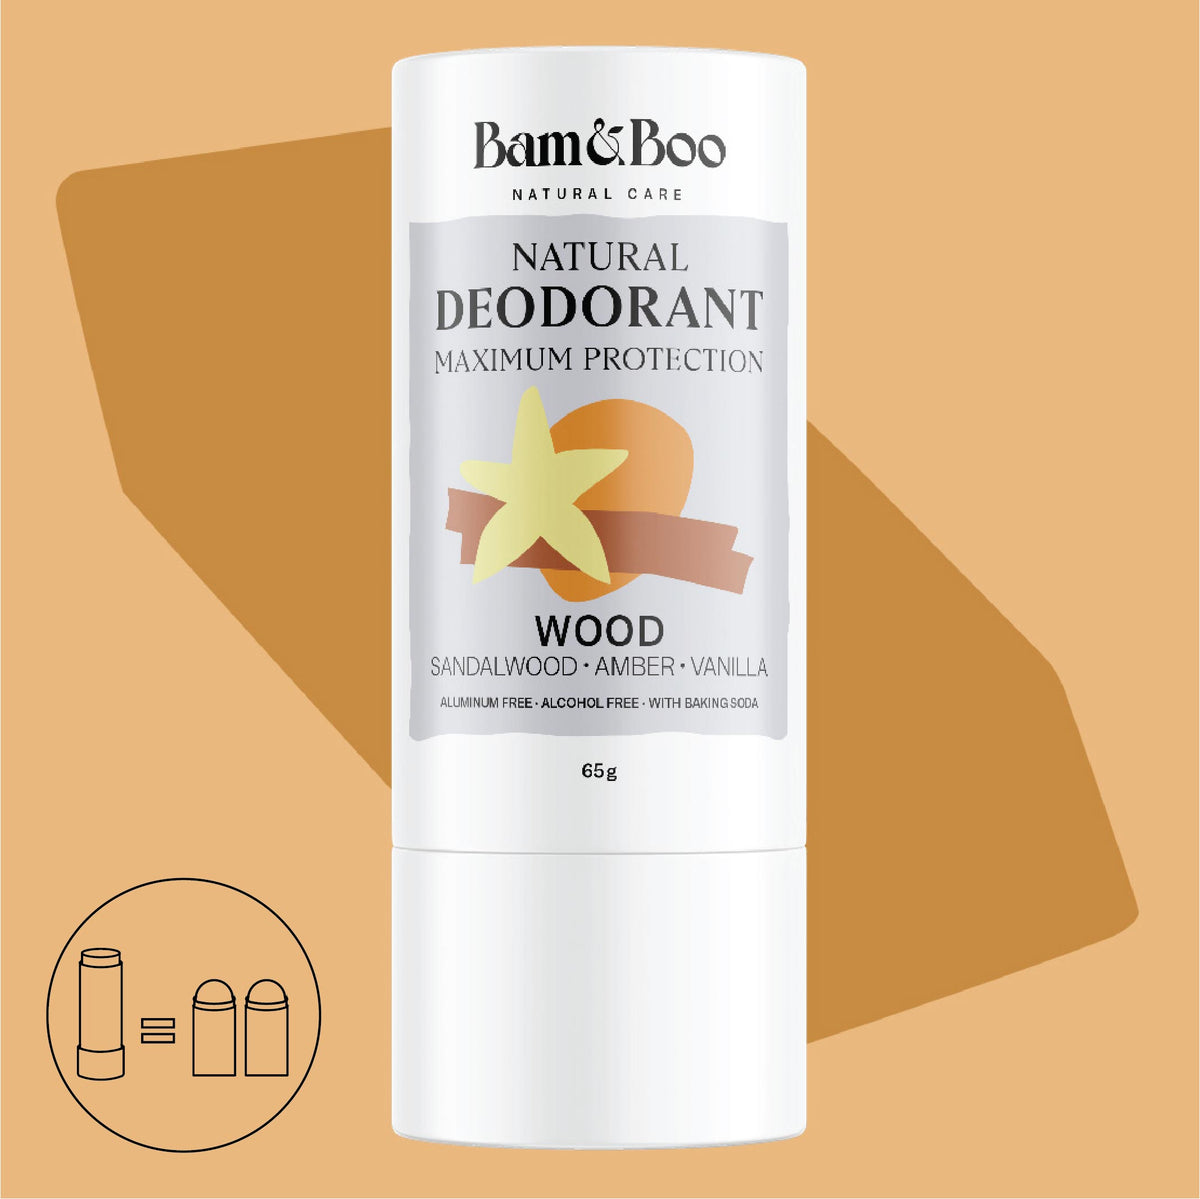 NATURAL DEODORANT | MAXIMUM PROTECTION | Wood - Sandalwood, Amber &amp; Vanilla - Bam&amp;Boo - Eco-friendly, vegan, sustainable oral and personal care